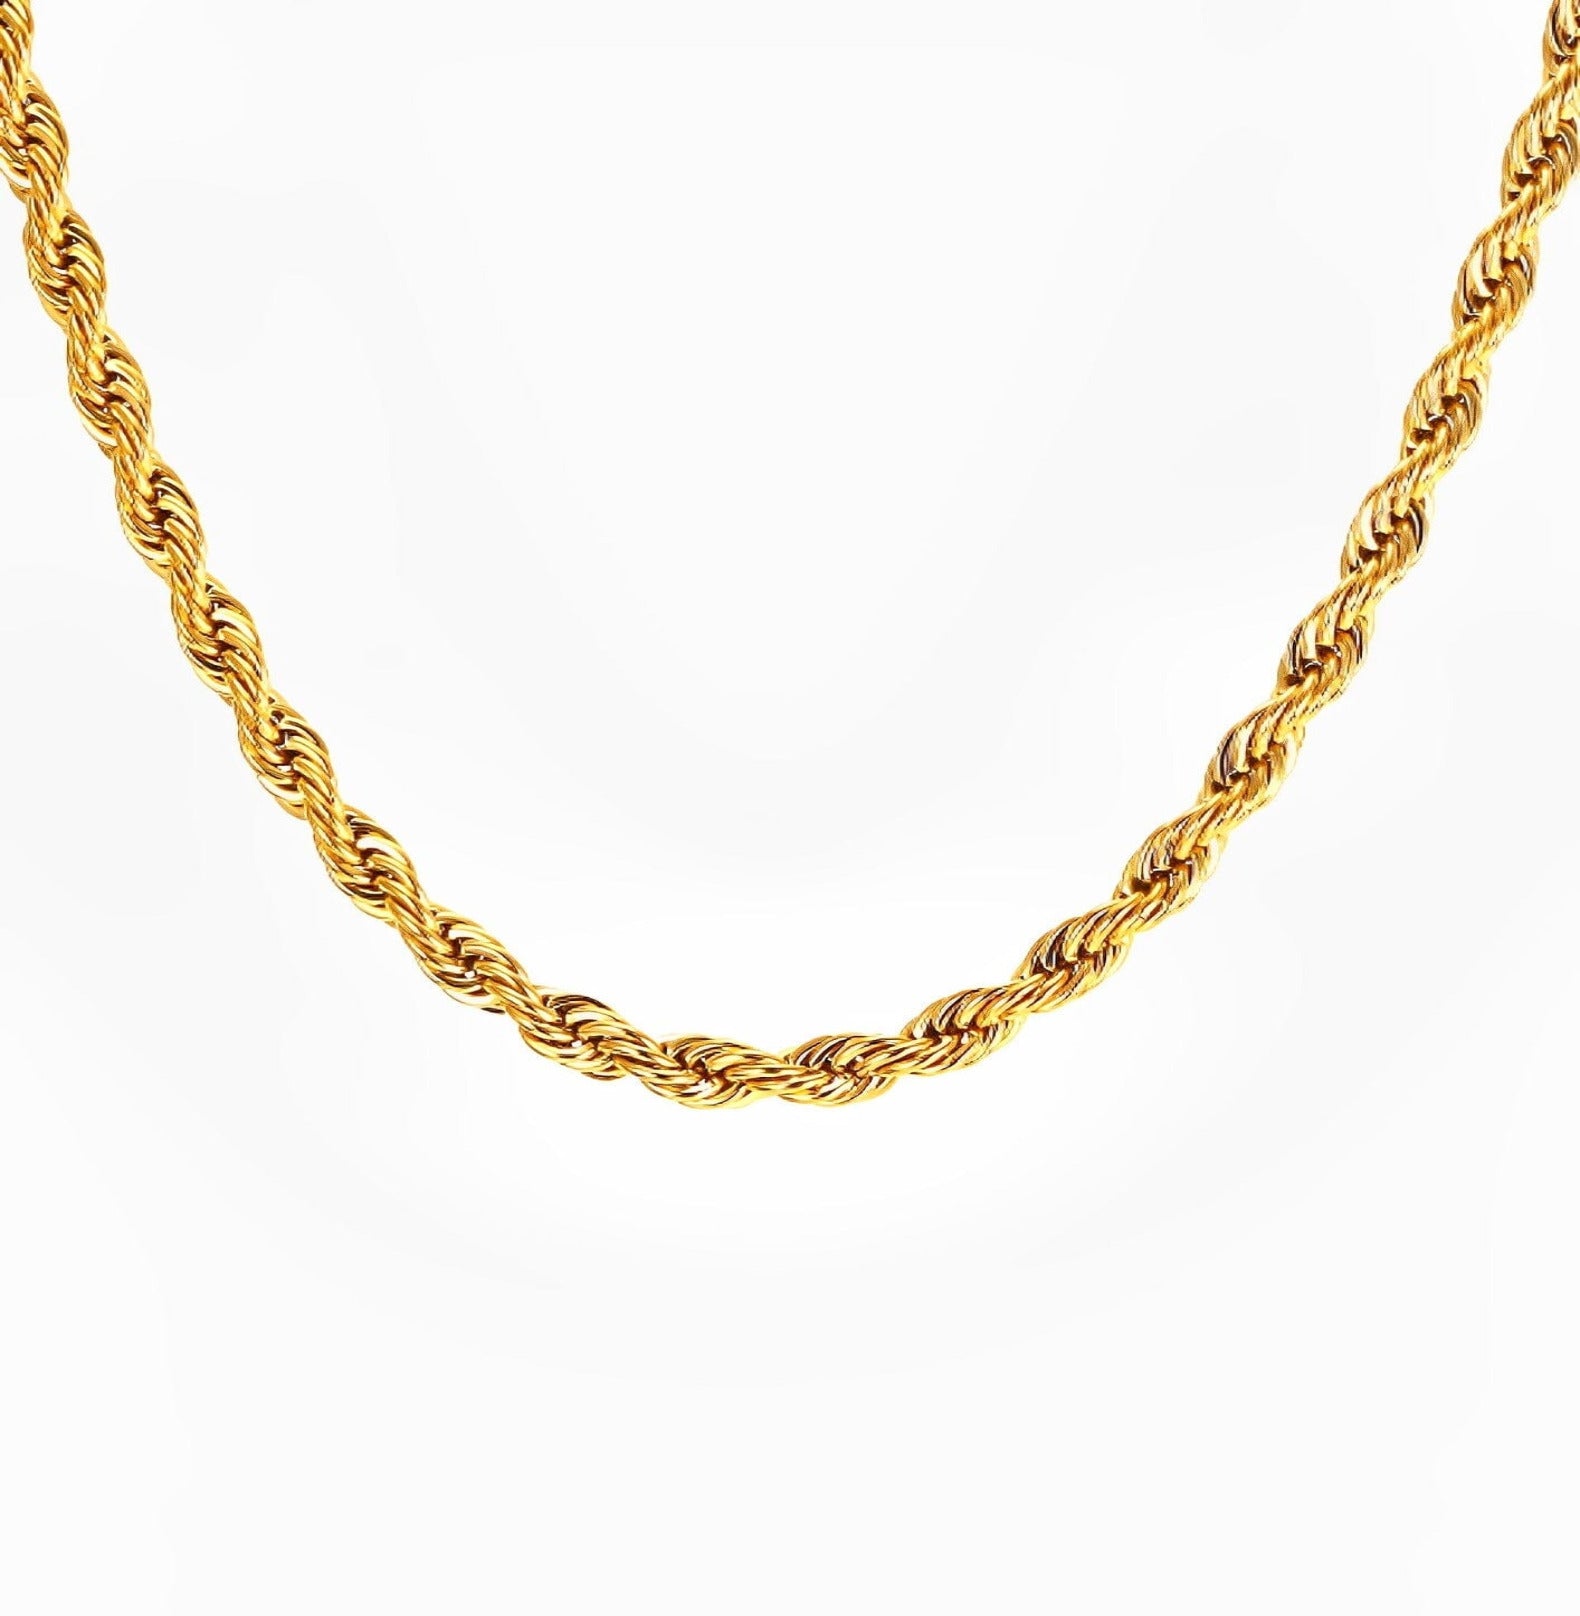 ROPE NECKLACE neck Yubama Jewelry Online Store - The Elegant Designs of Gold and Silver ! 